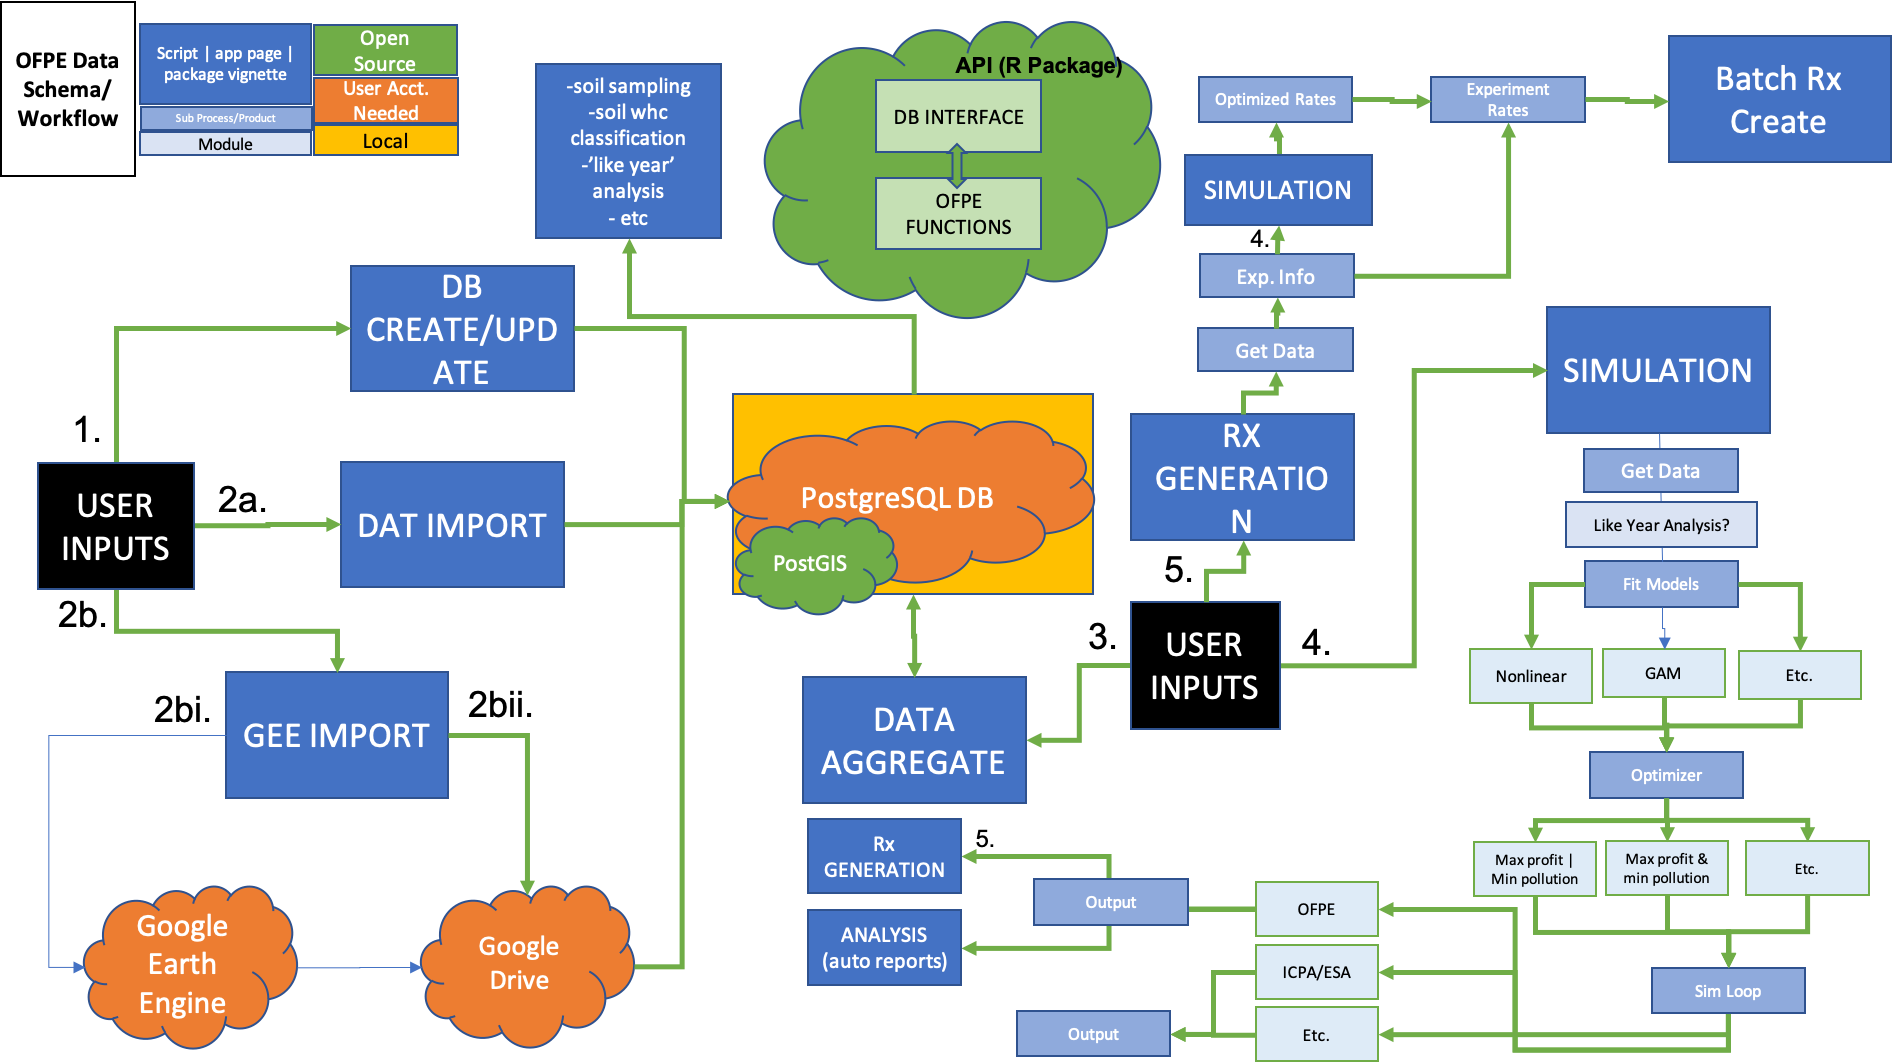 **Figure 3.** Key is found in the top left corner of the schematic. Green arrows represent processes that require the OFPE package. The PostgreSQL database in the center of the figure can be stored on a cloud server or a local computer (as indicated by shape). Dark blue boxes indicate processes that are vignettes of the OFPE package or pages of the OFPE Web Application. Light blue boxes represent alternate modules for executable processes.